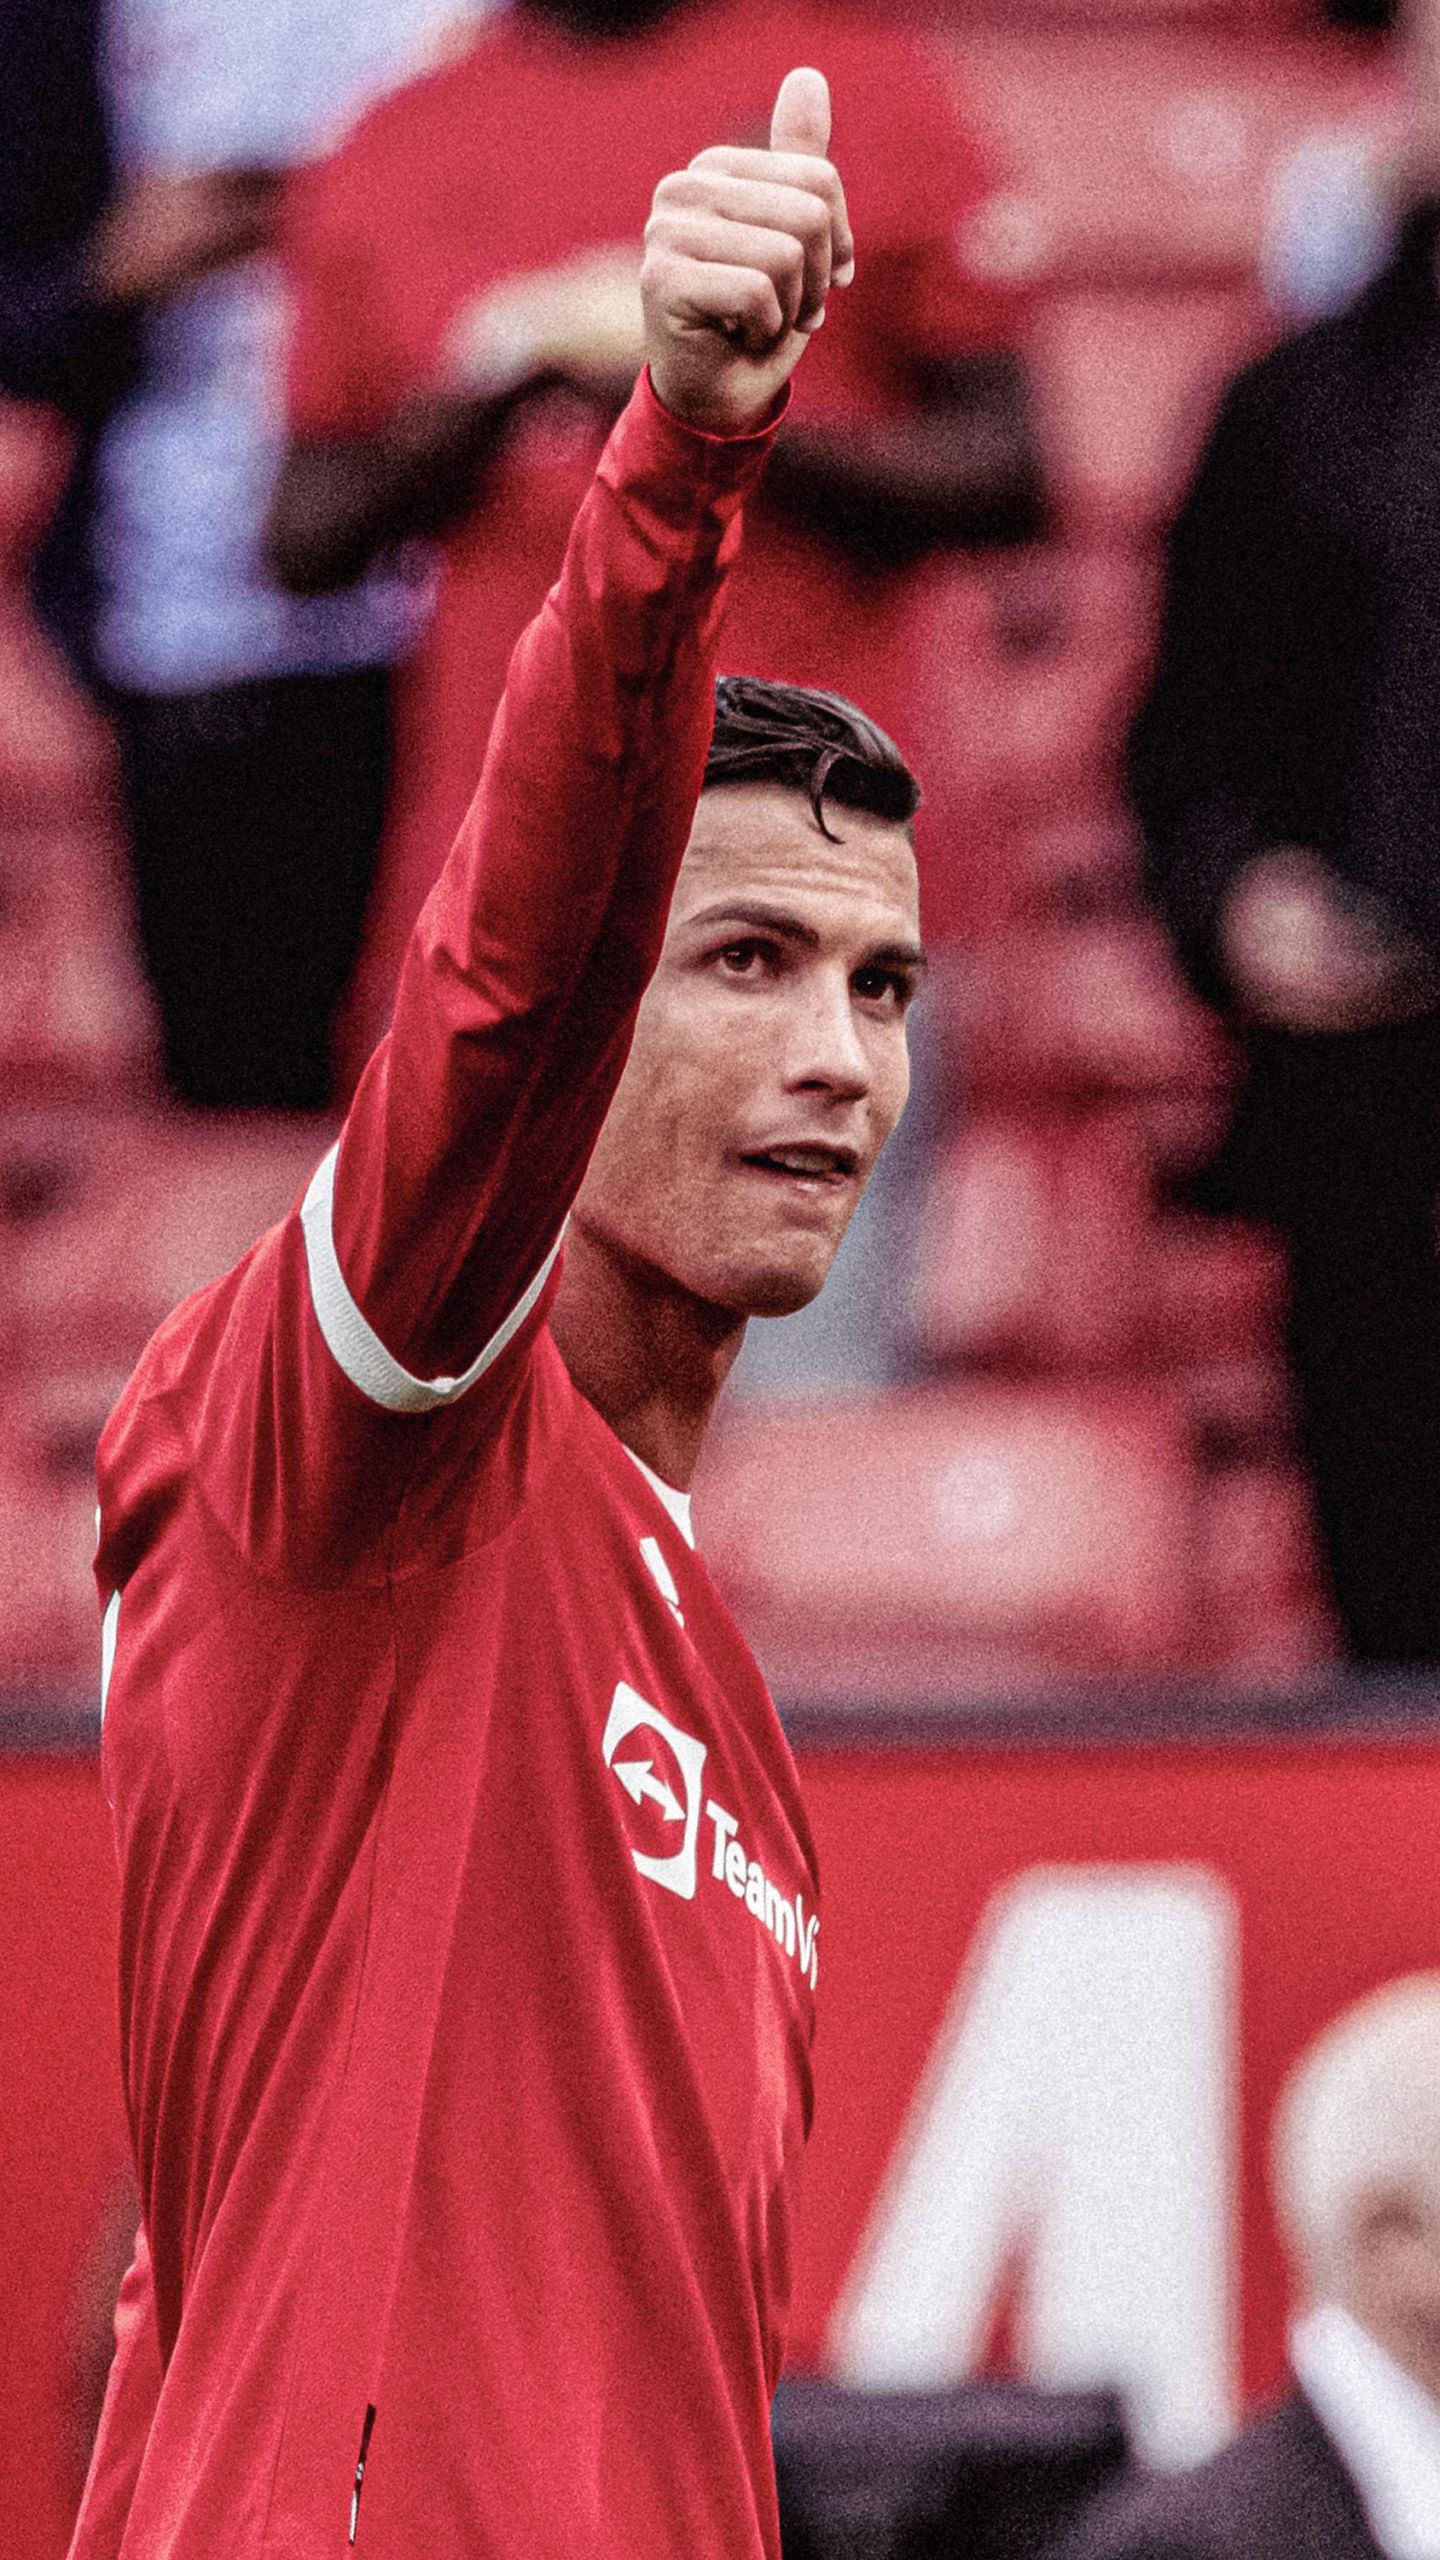 Cristiano Ronaldo showing his thumb up in a red jersey - Cristiano Ronaldo